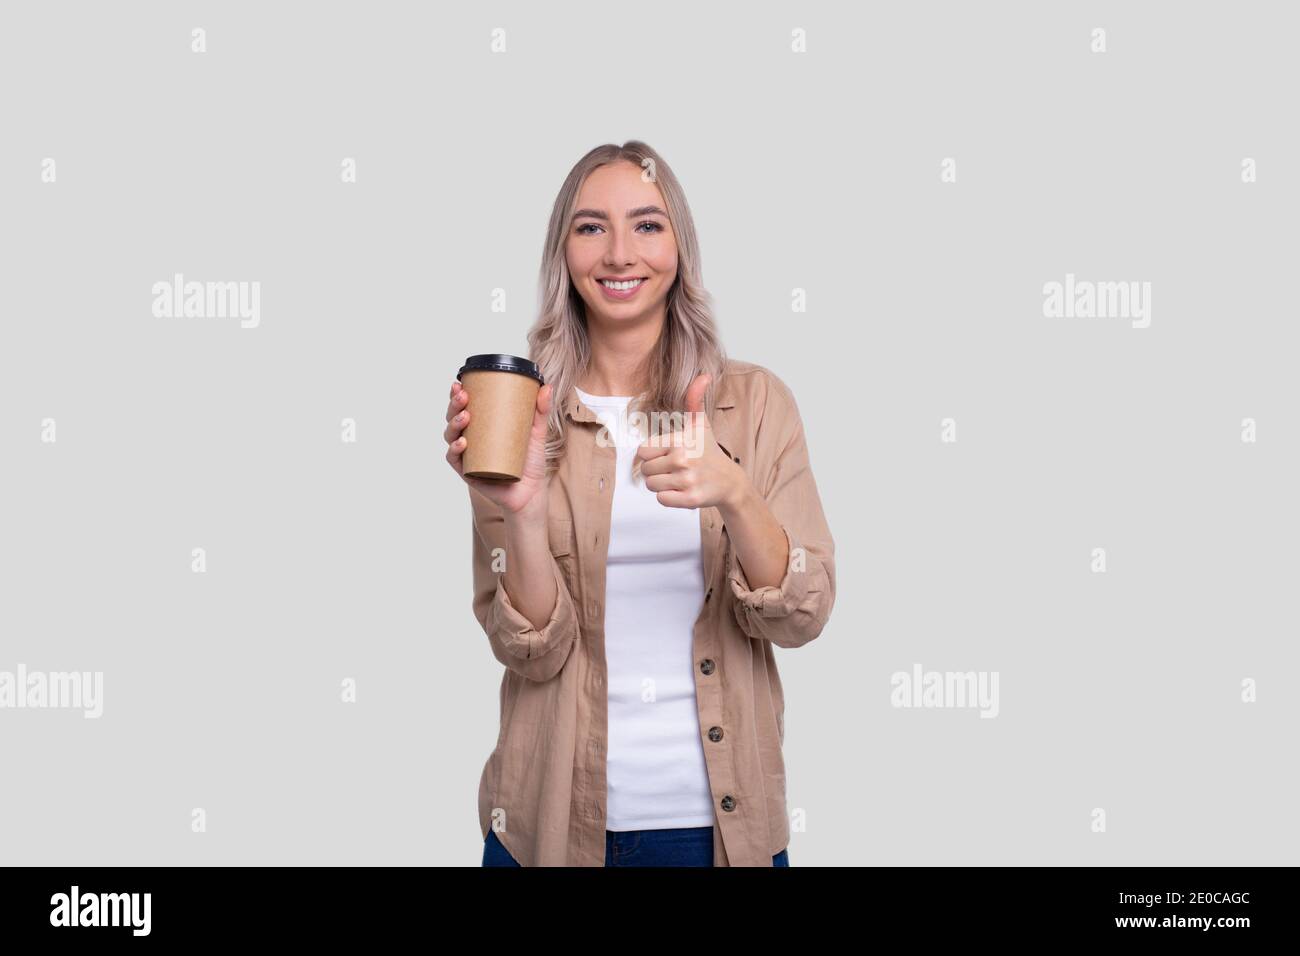 Girl Holding Take Away Coffee Cup Showing Thumb Up. Girl With To Go Coffee Cup in Hands. Stock Photo